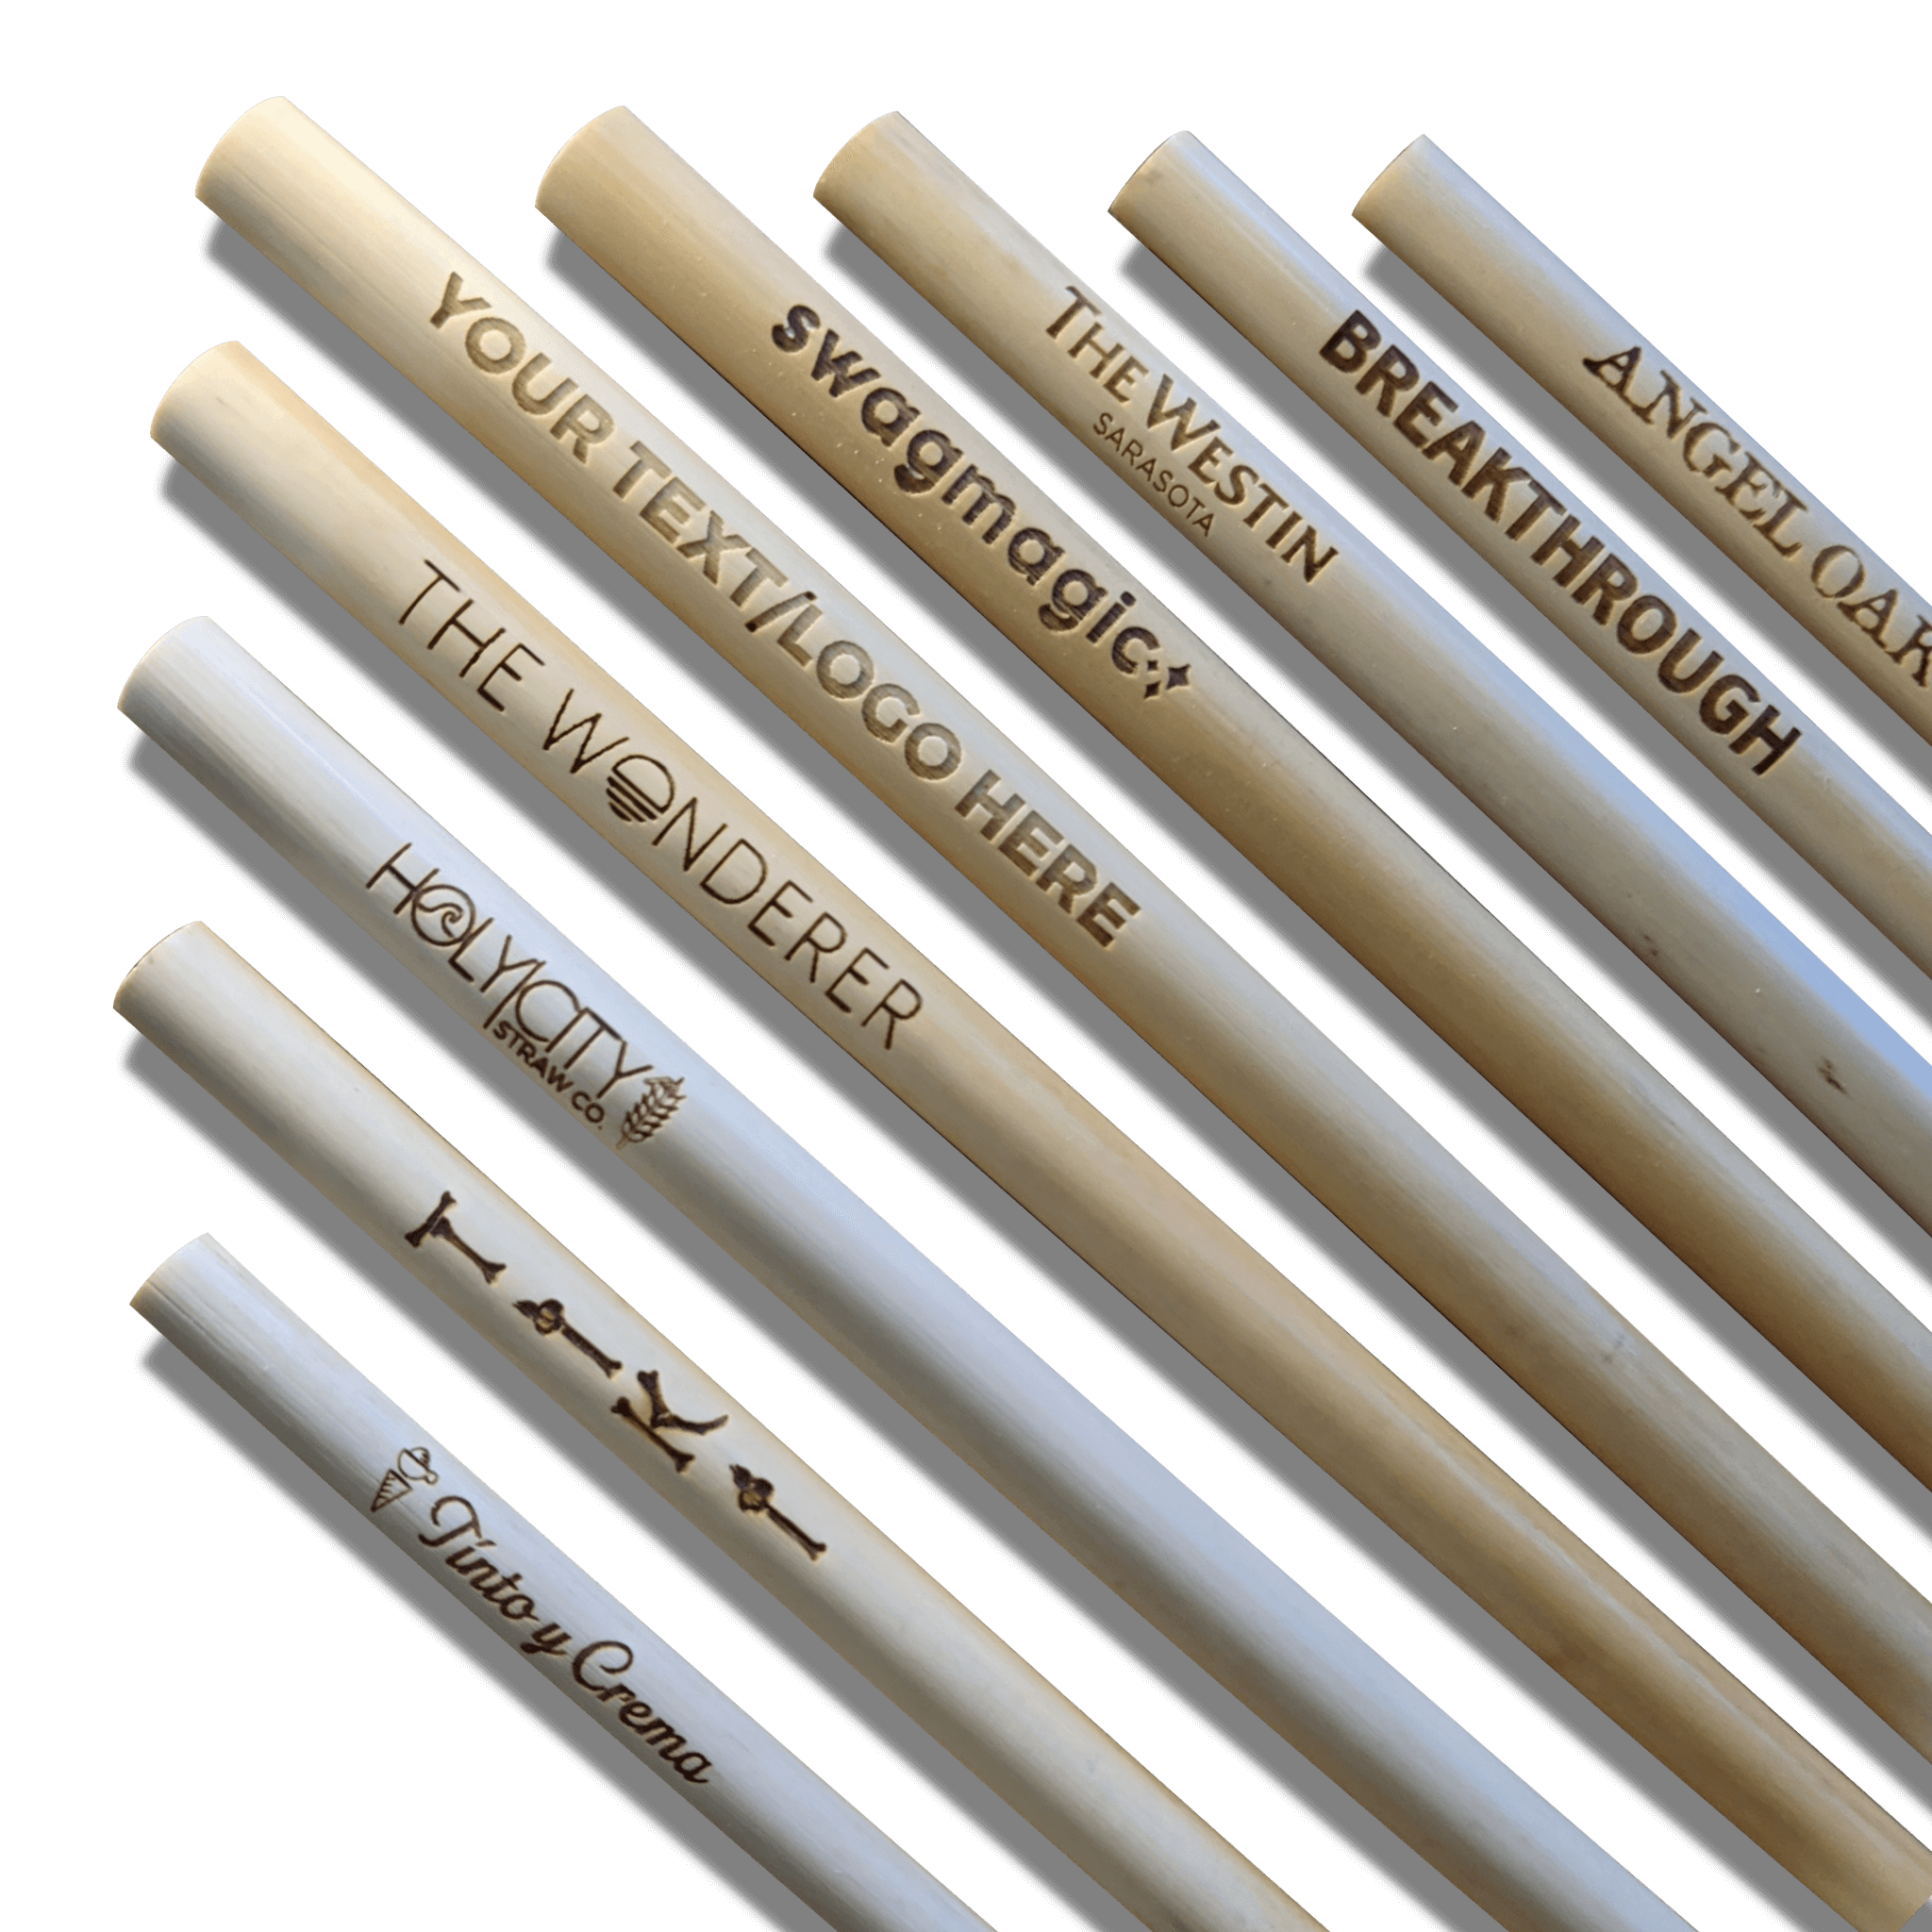 Collection of laser engraved drinking reusable reed stem straws